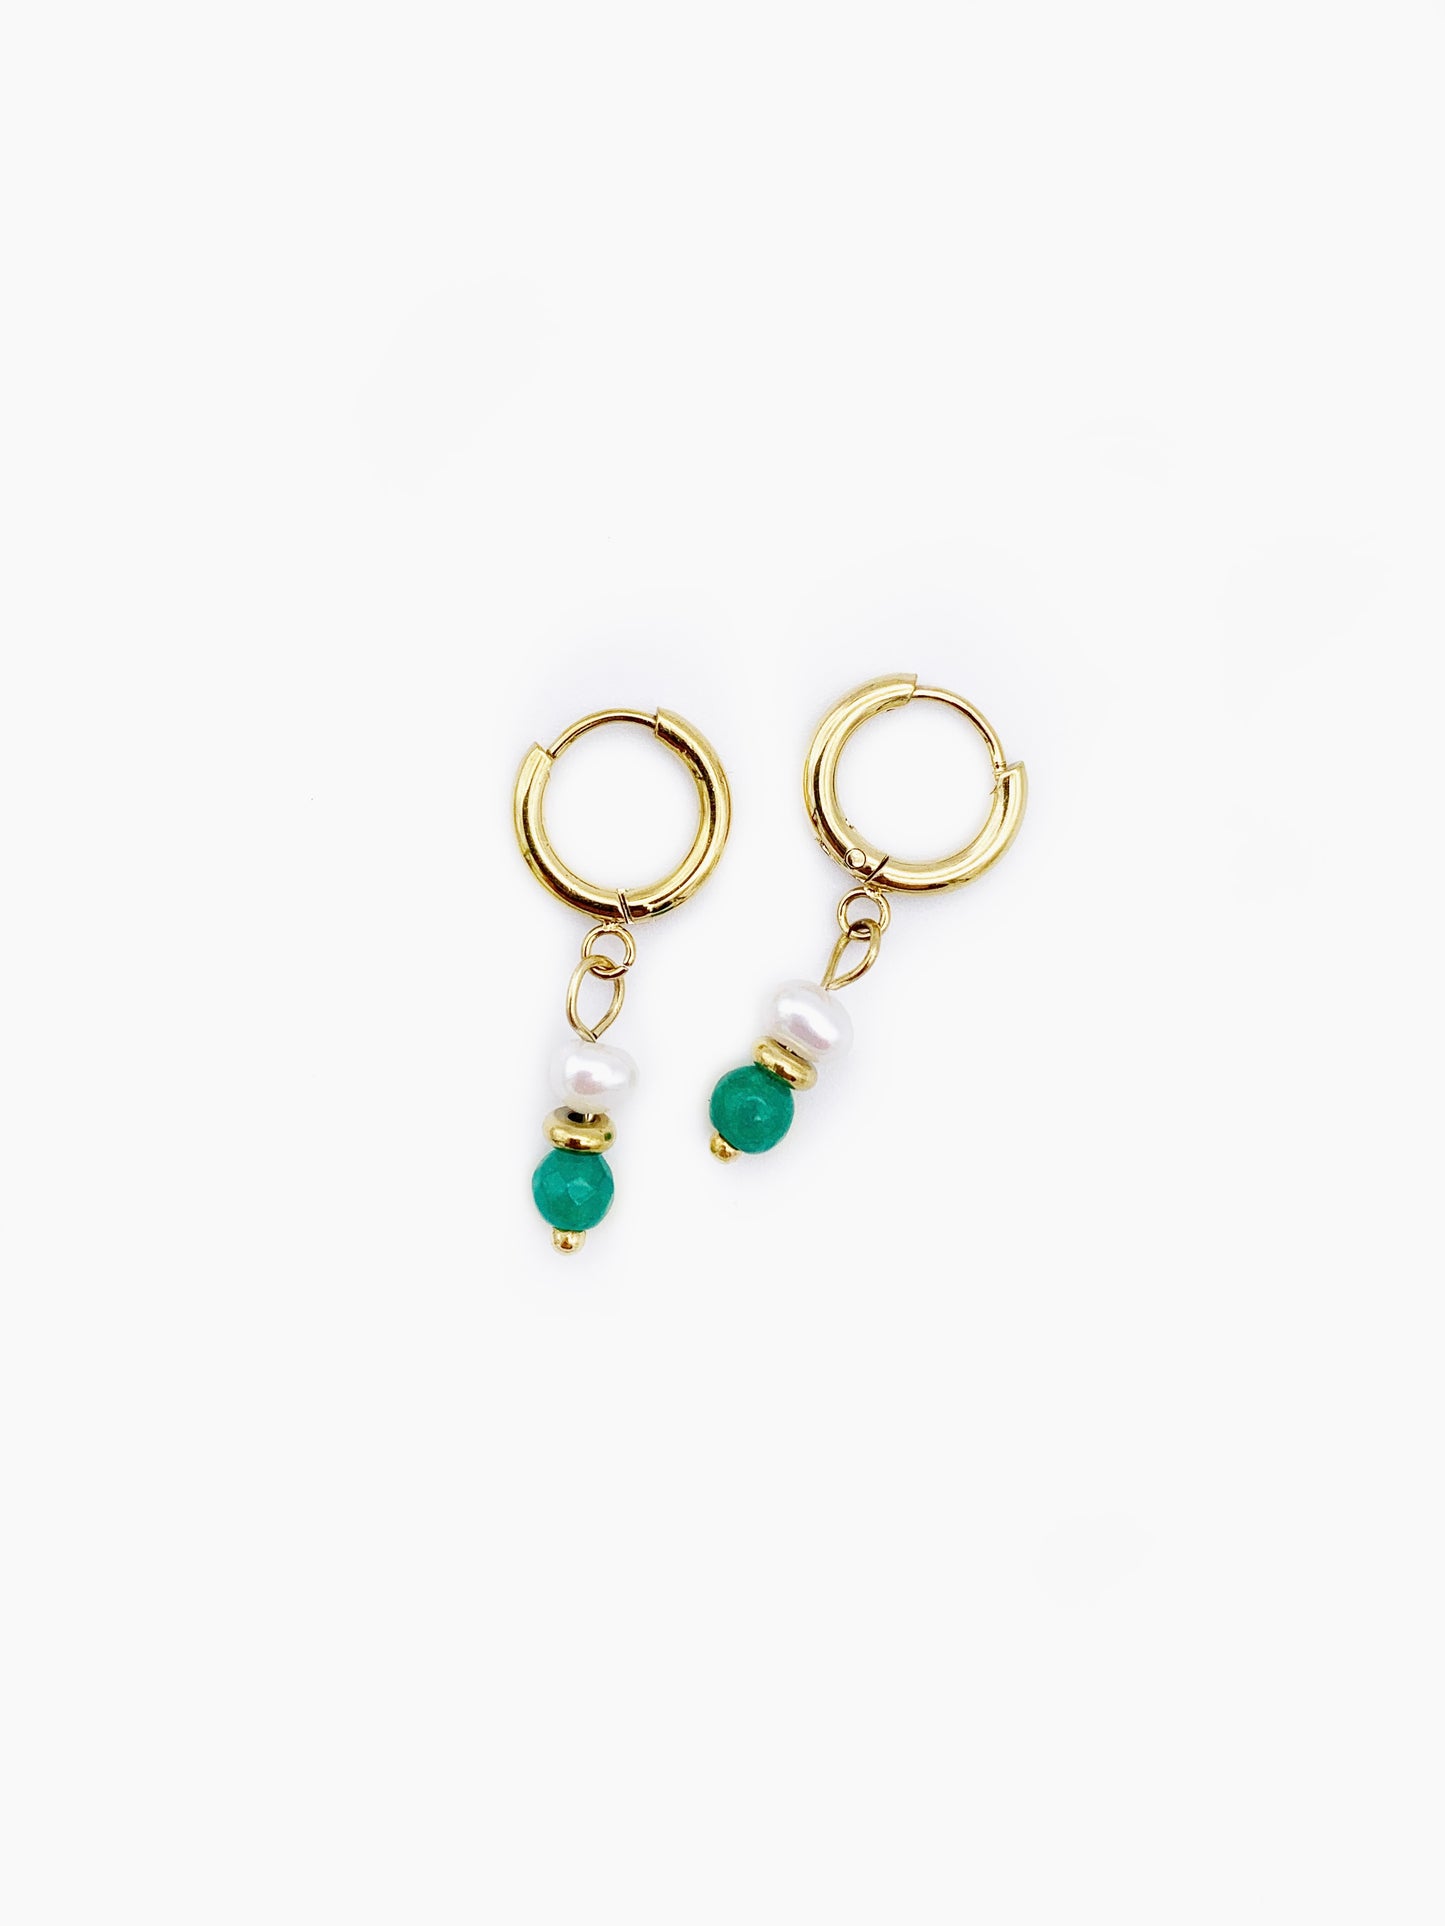 GREEN STONES AND PEARLS EARRINGS